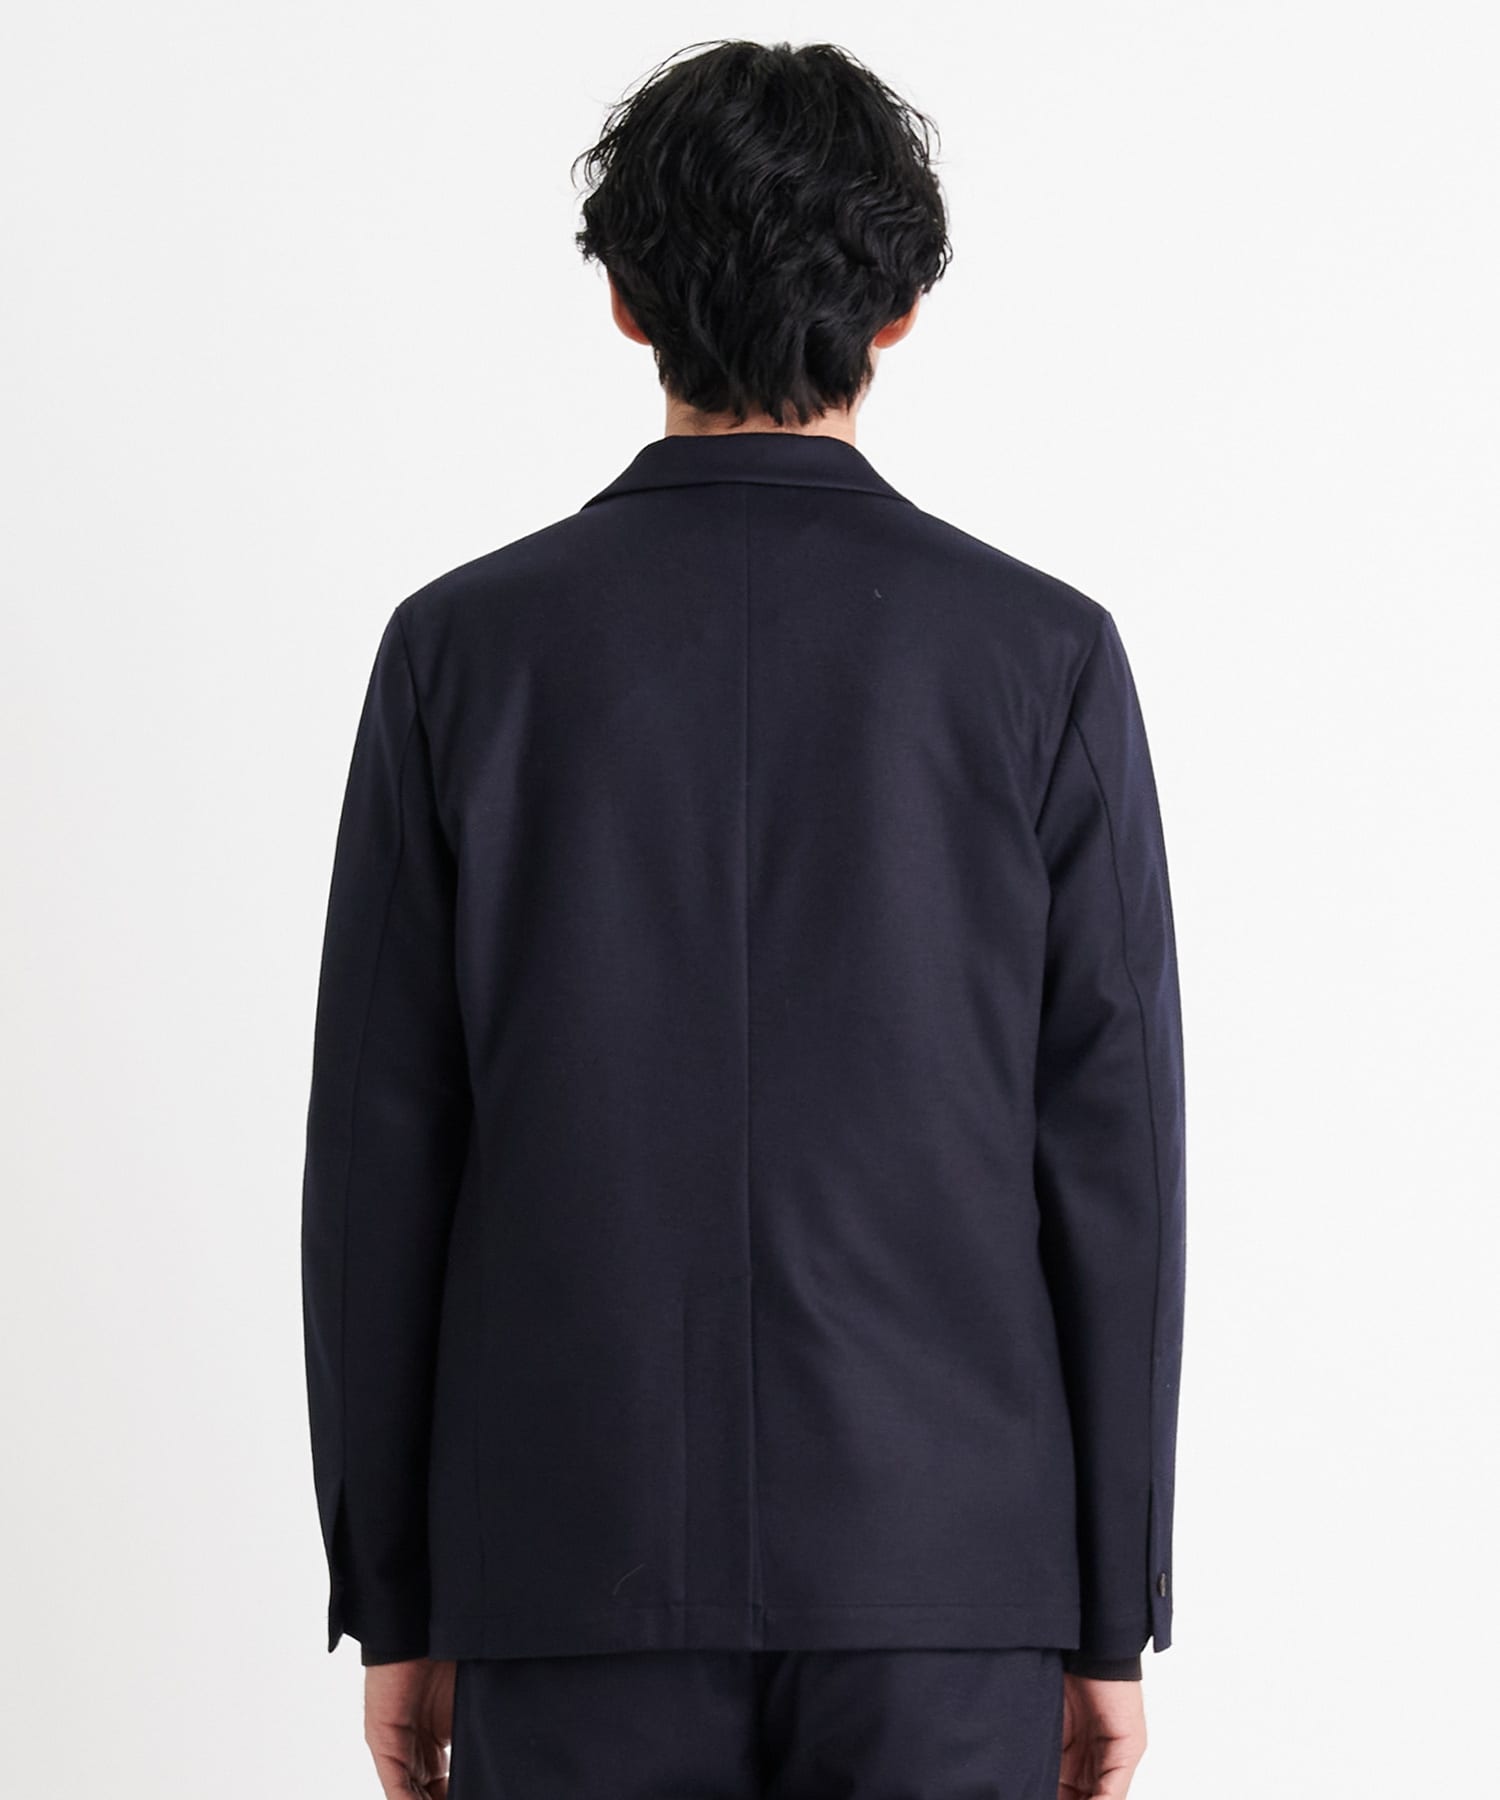 Flanne Lana Cashmere Touch Shape Jacket THE TOKYO